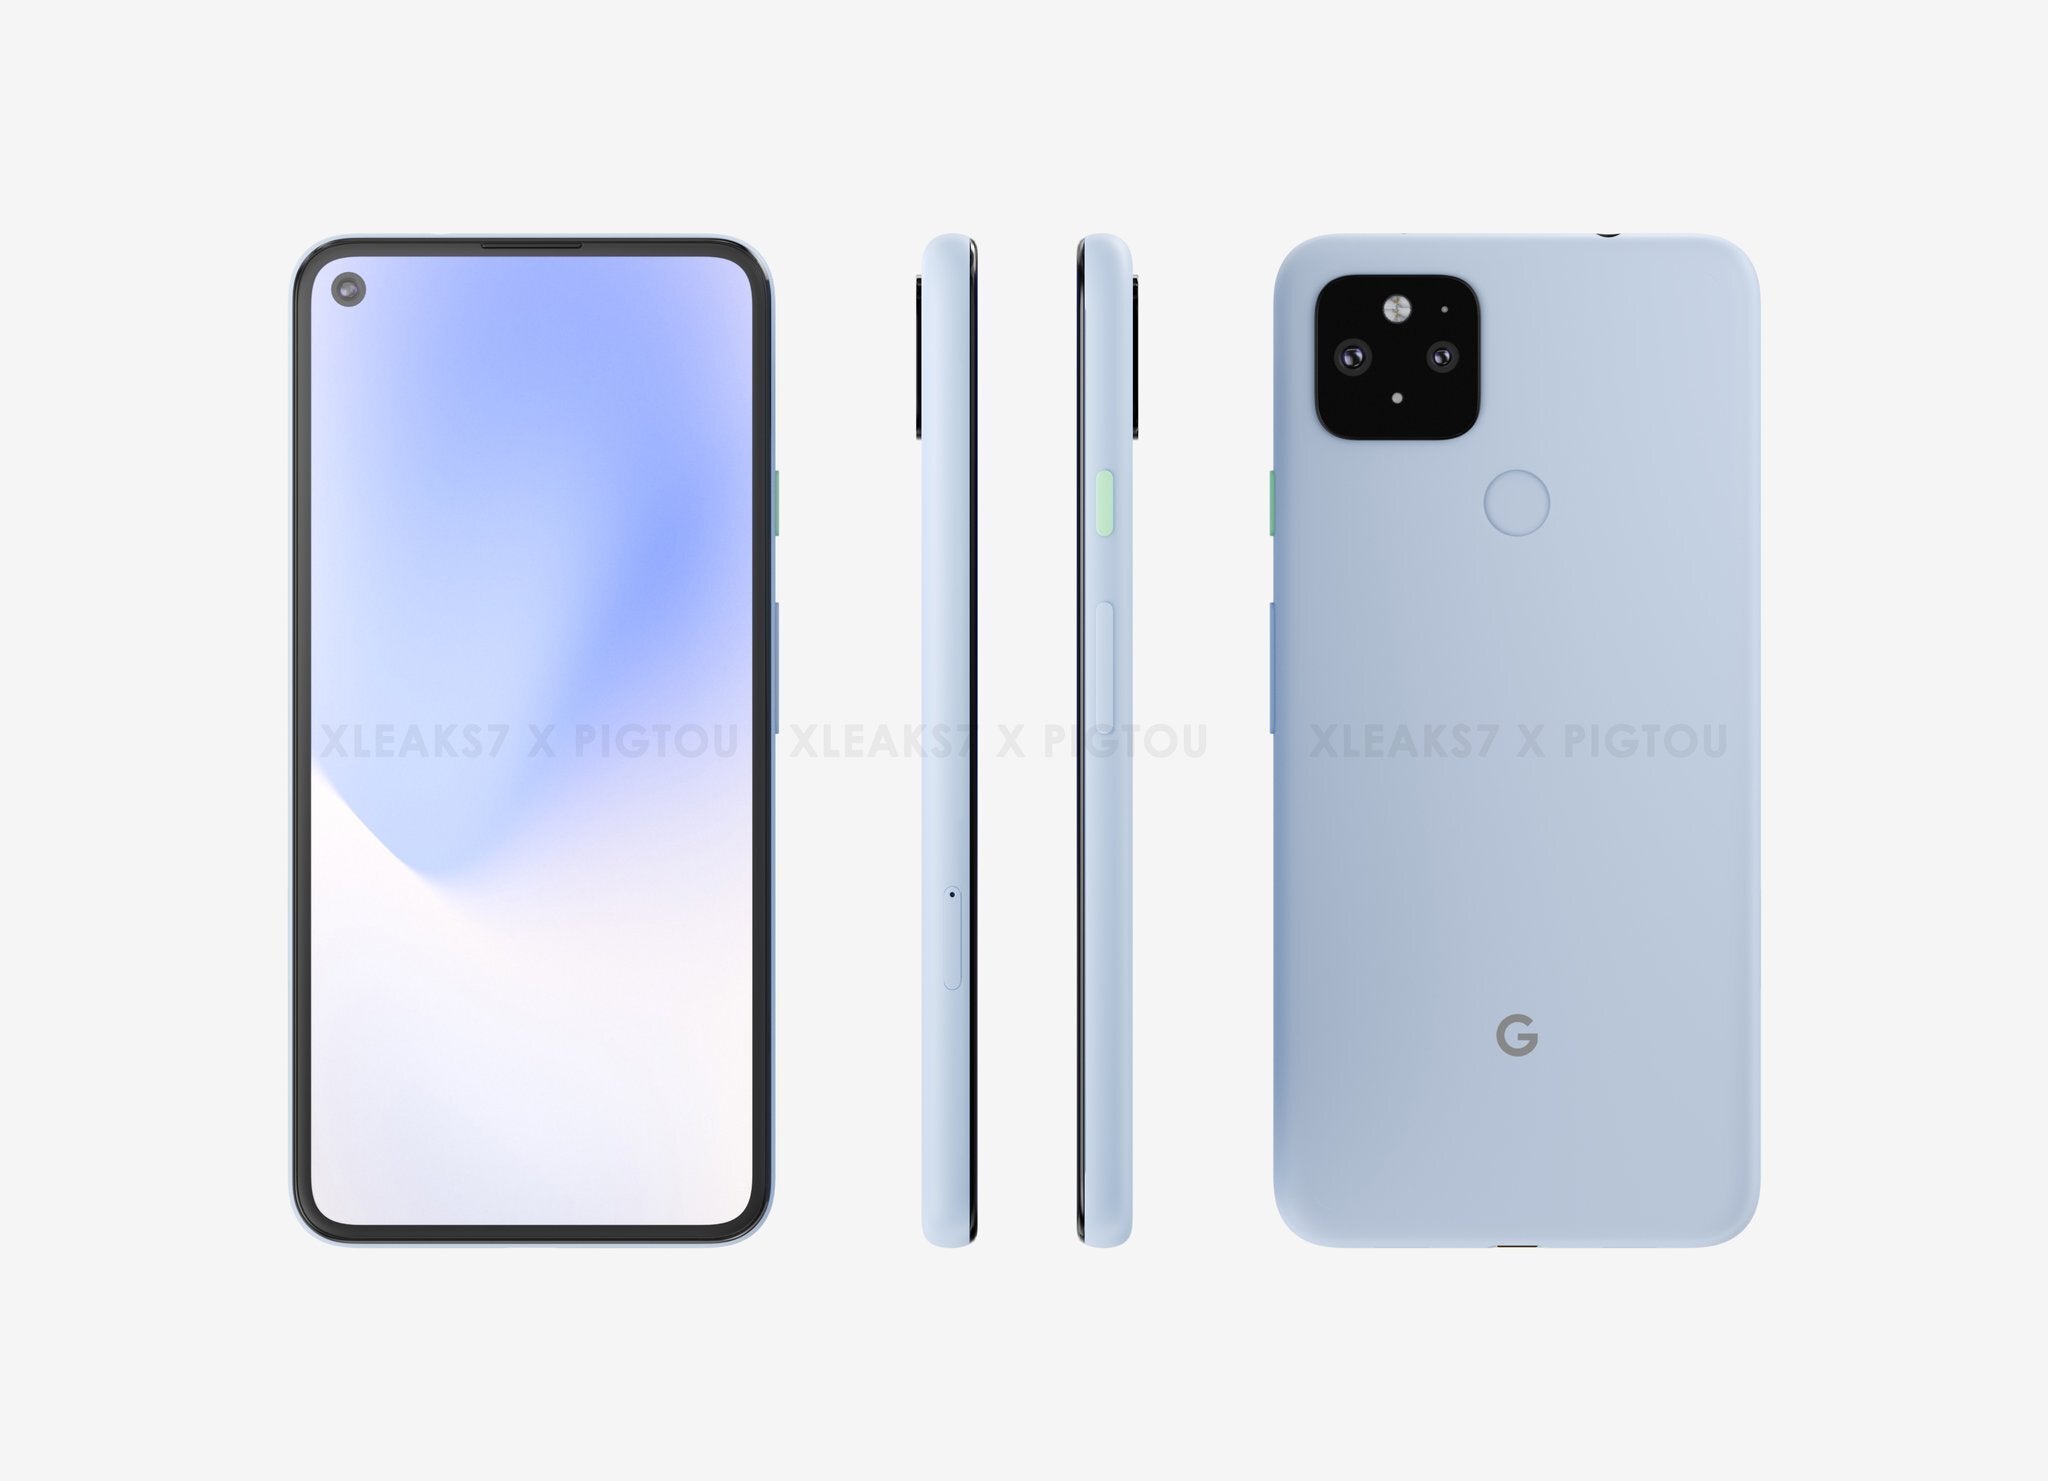 The Google Pixel 4a (5G) - Google Pixel 5G lineup: Pixel 5 officially coming this fall with $499 Pixel 4a (5G)